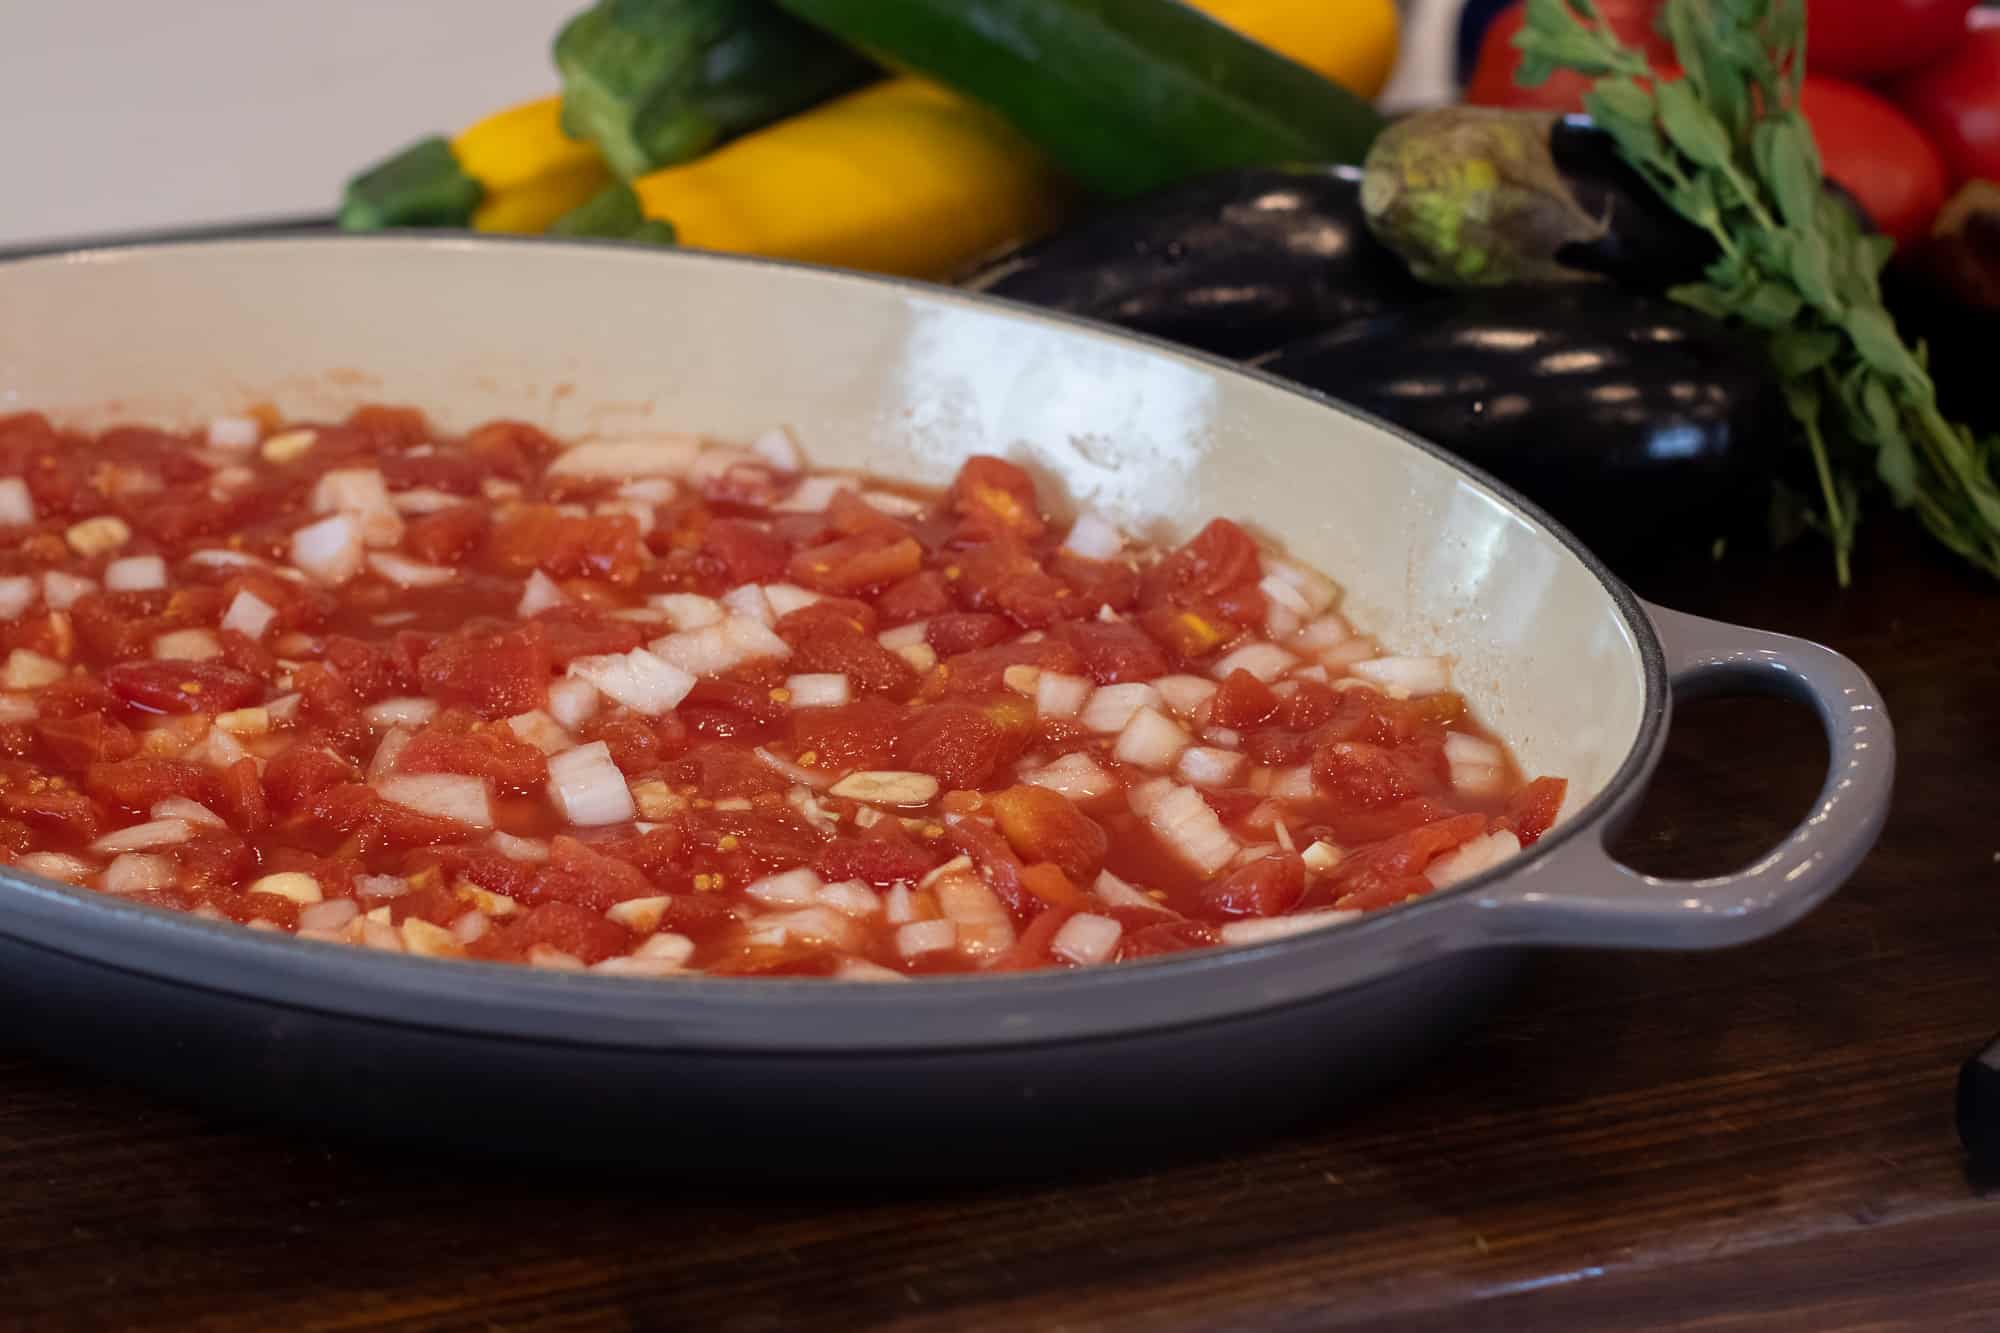 Spread the diced tomatoes, onion and garlic evenly on the bottom of the casserole dish